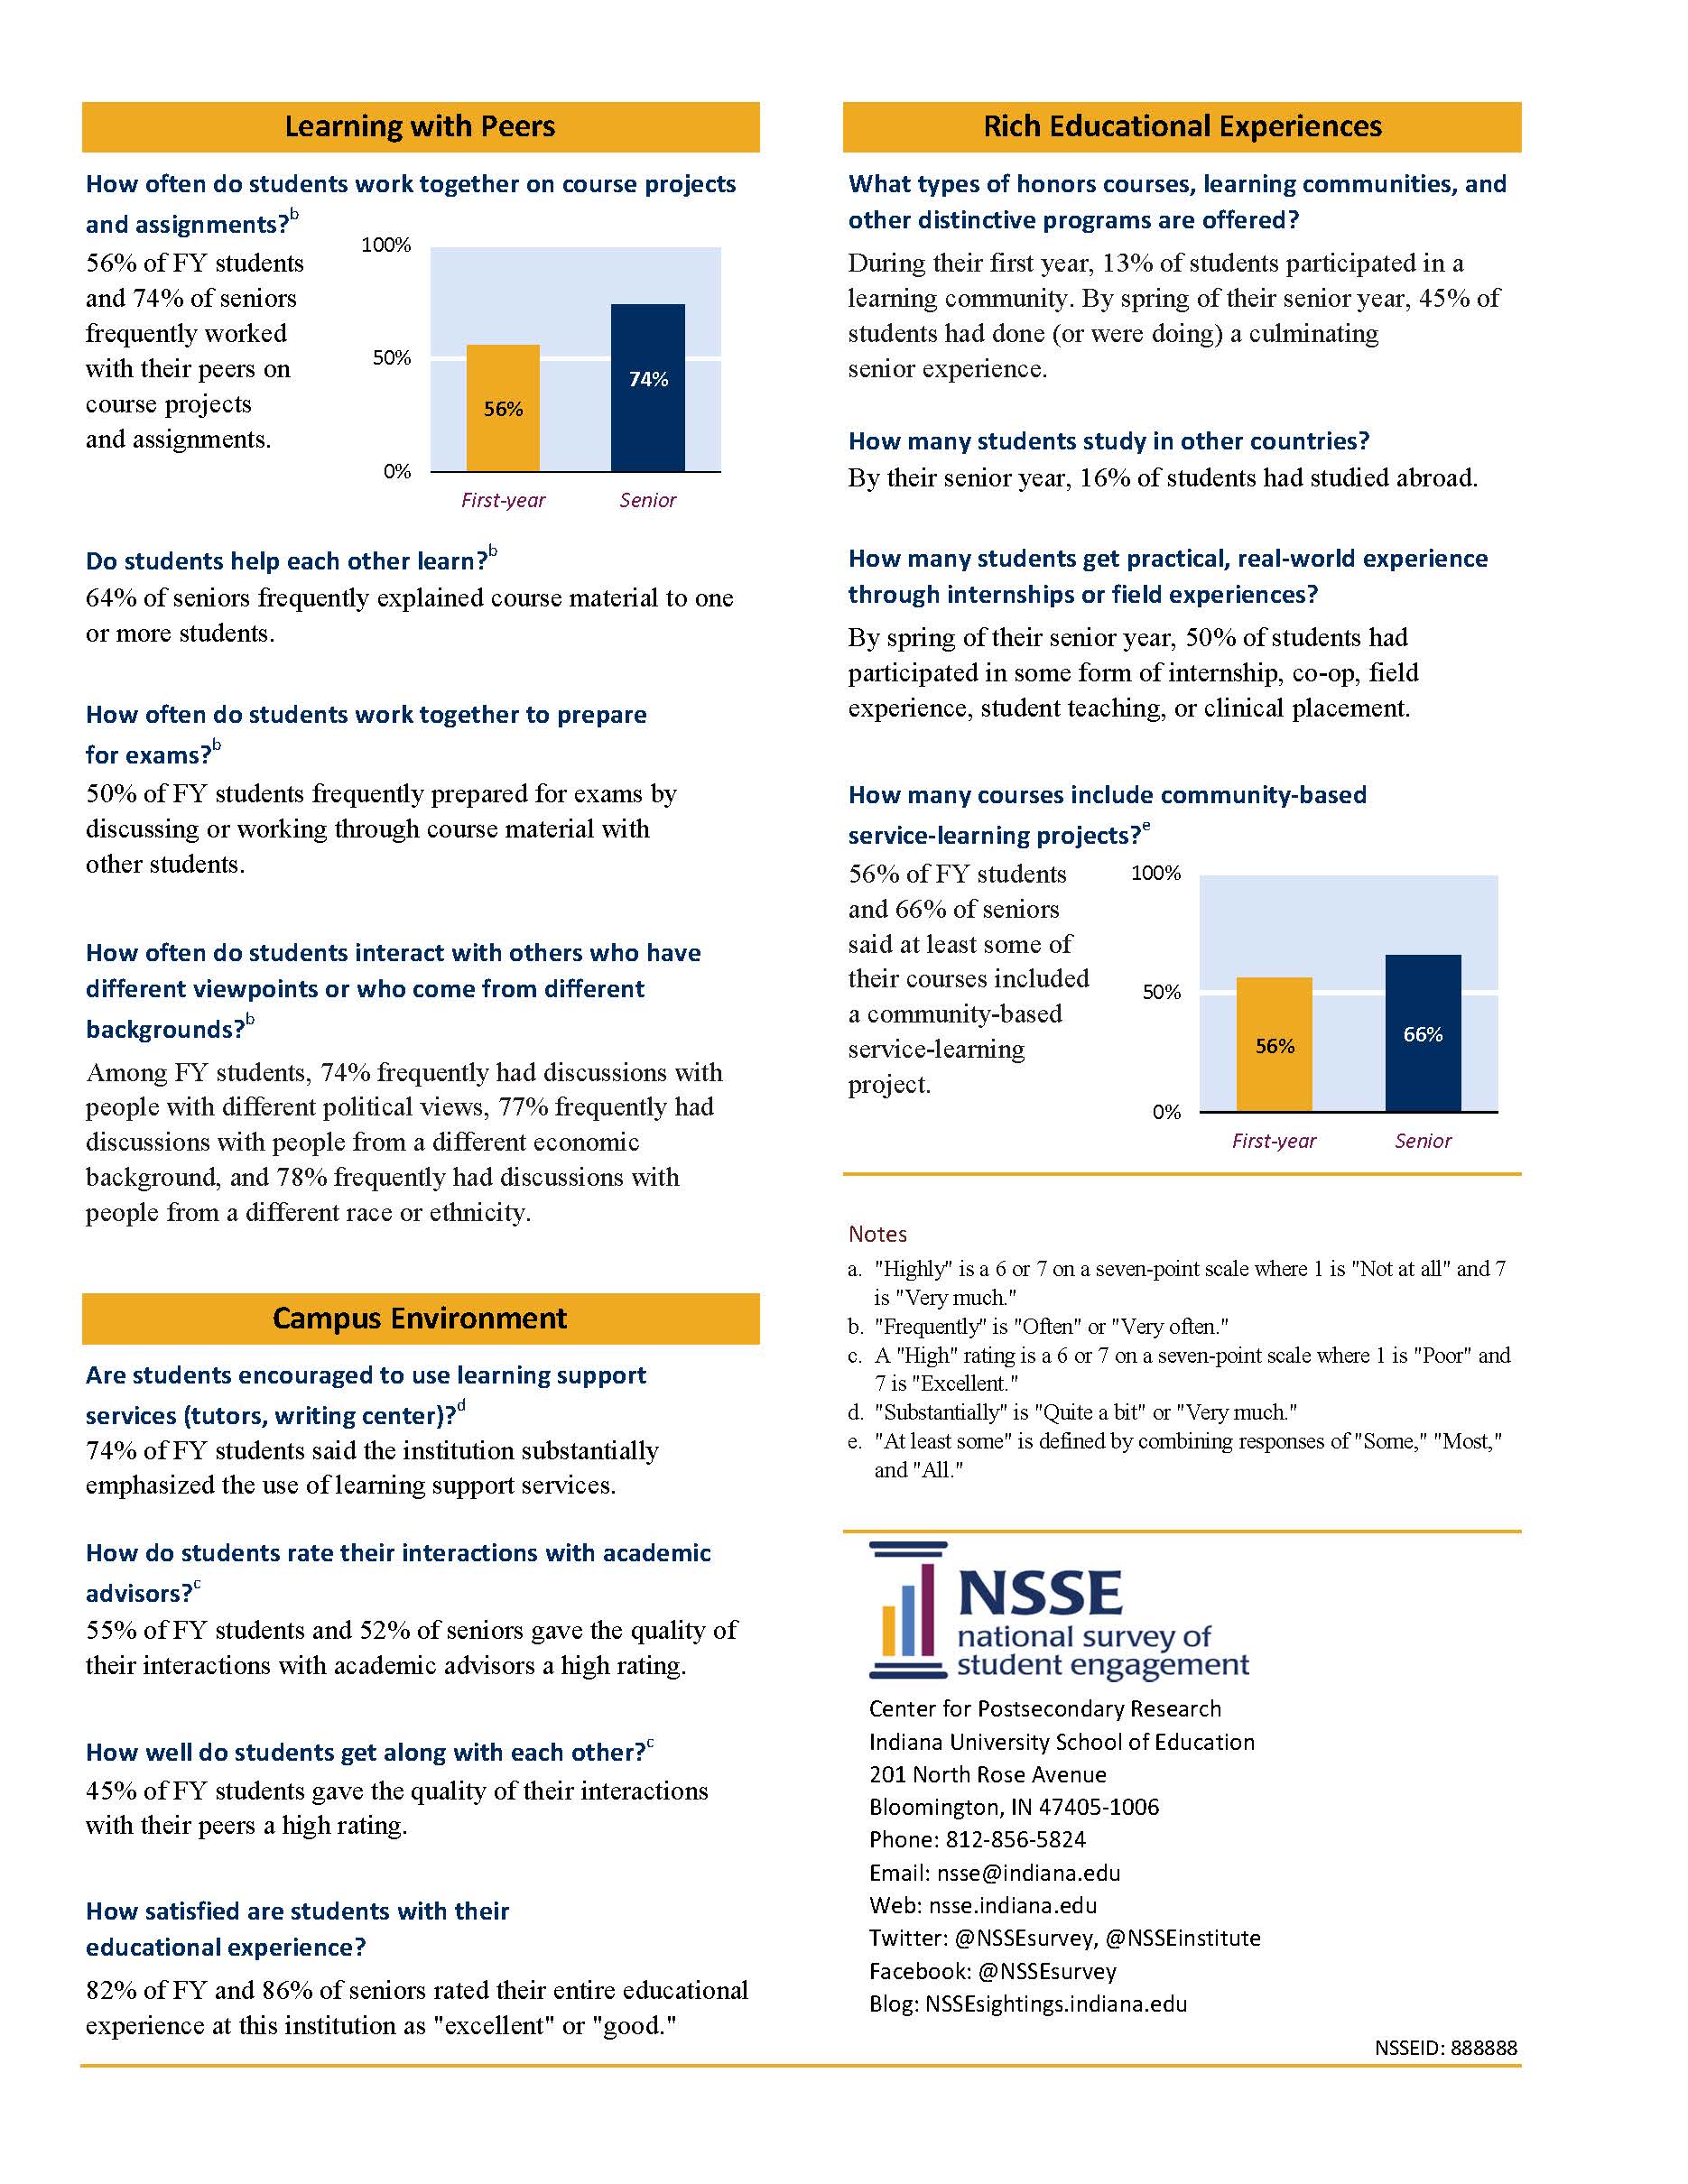 Sample Report: page 3 of NSSE Pocket Guide Report: NSSE 2019 Answers from Students